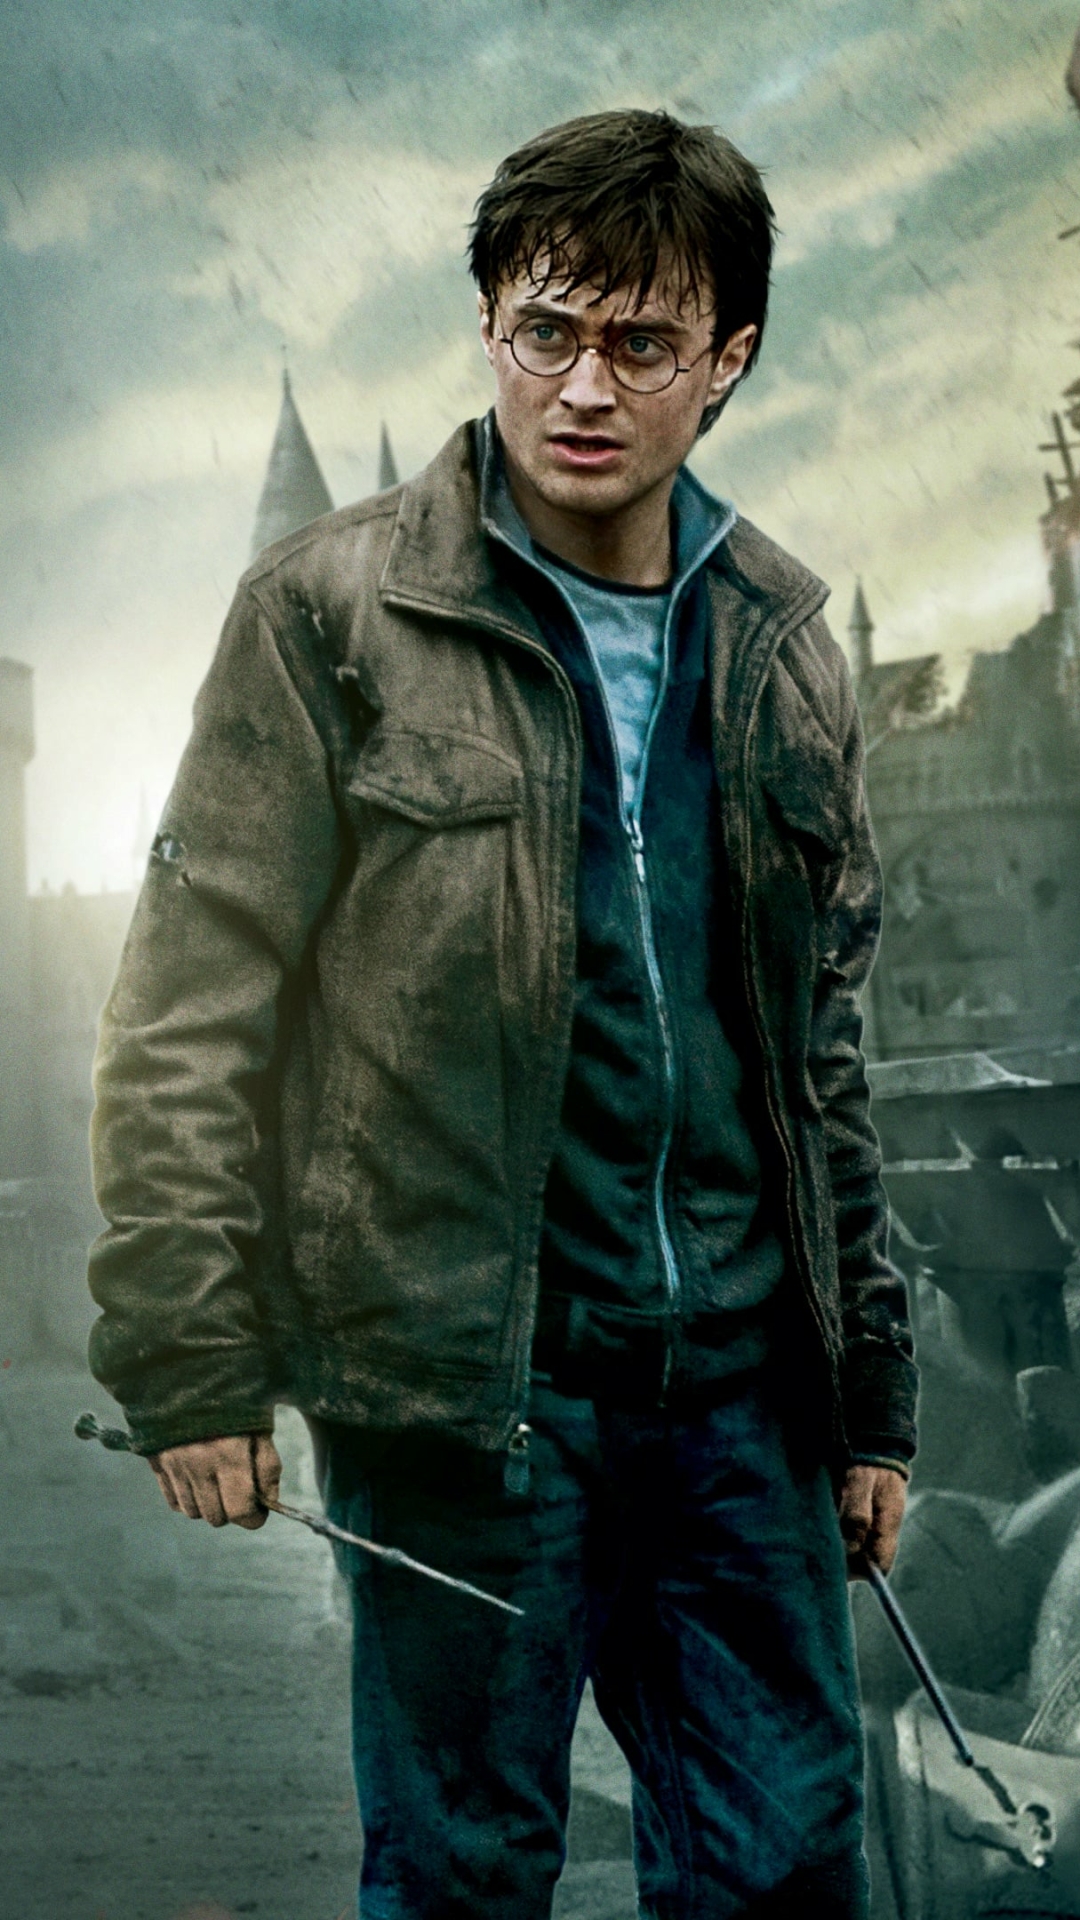 Harry Potter and the Deathly Hallows: Part 2 Phone Wallpaper